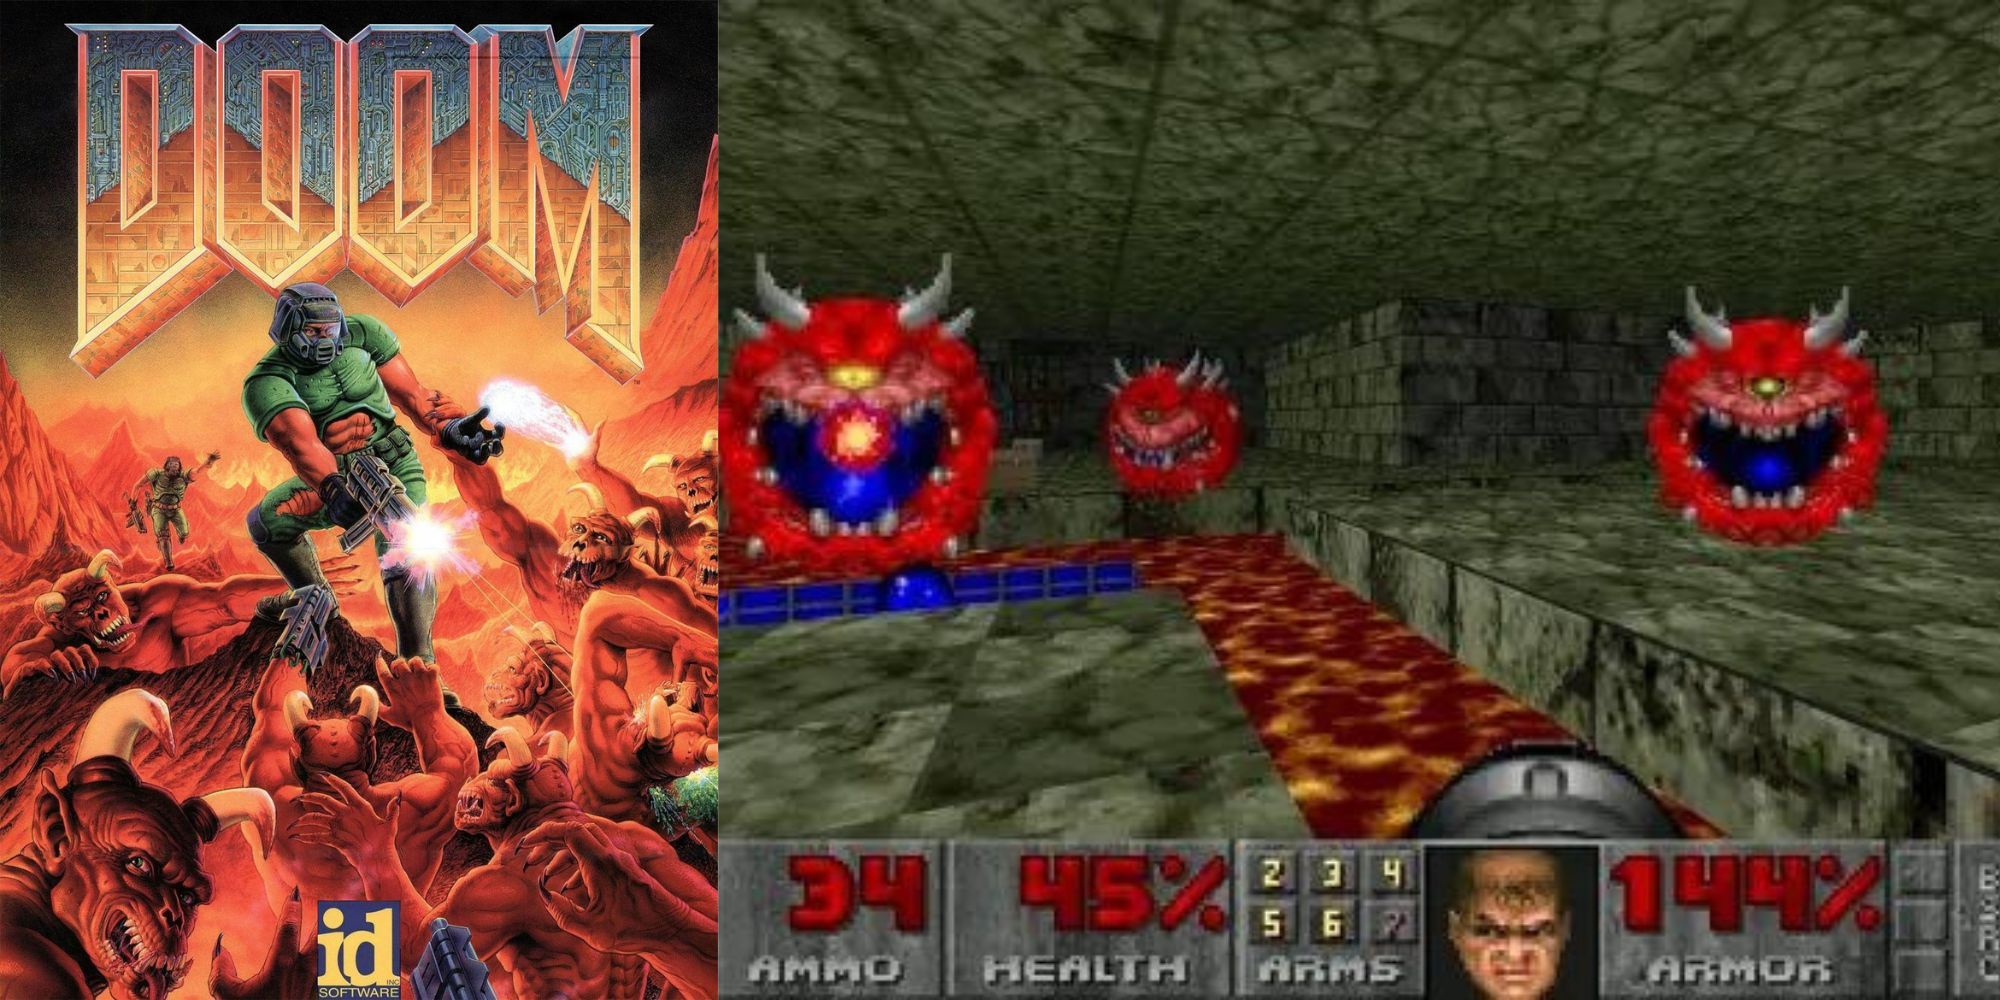 Doom cover art from original game with in-game image